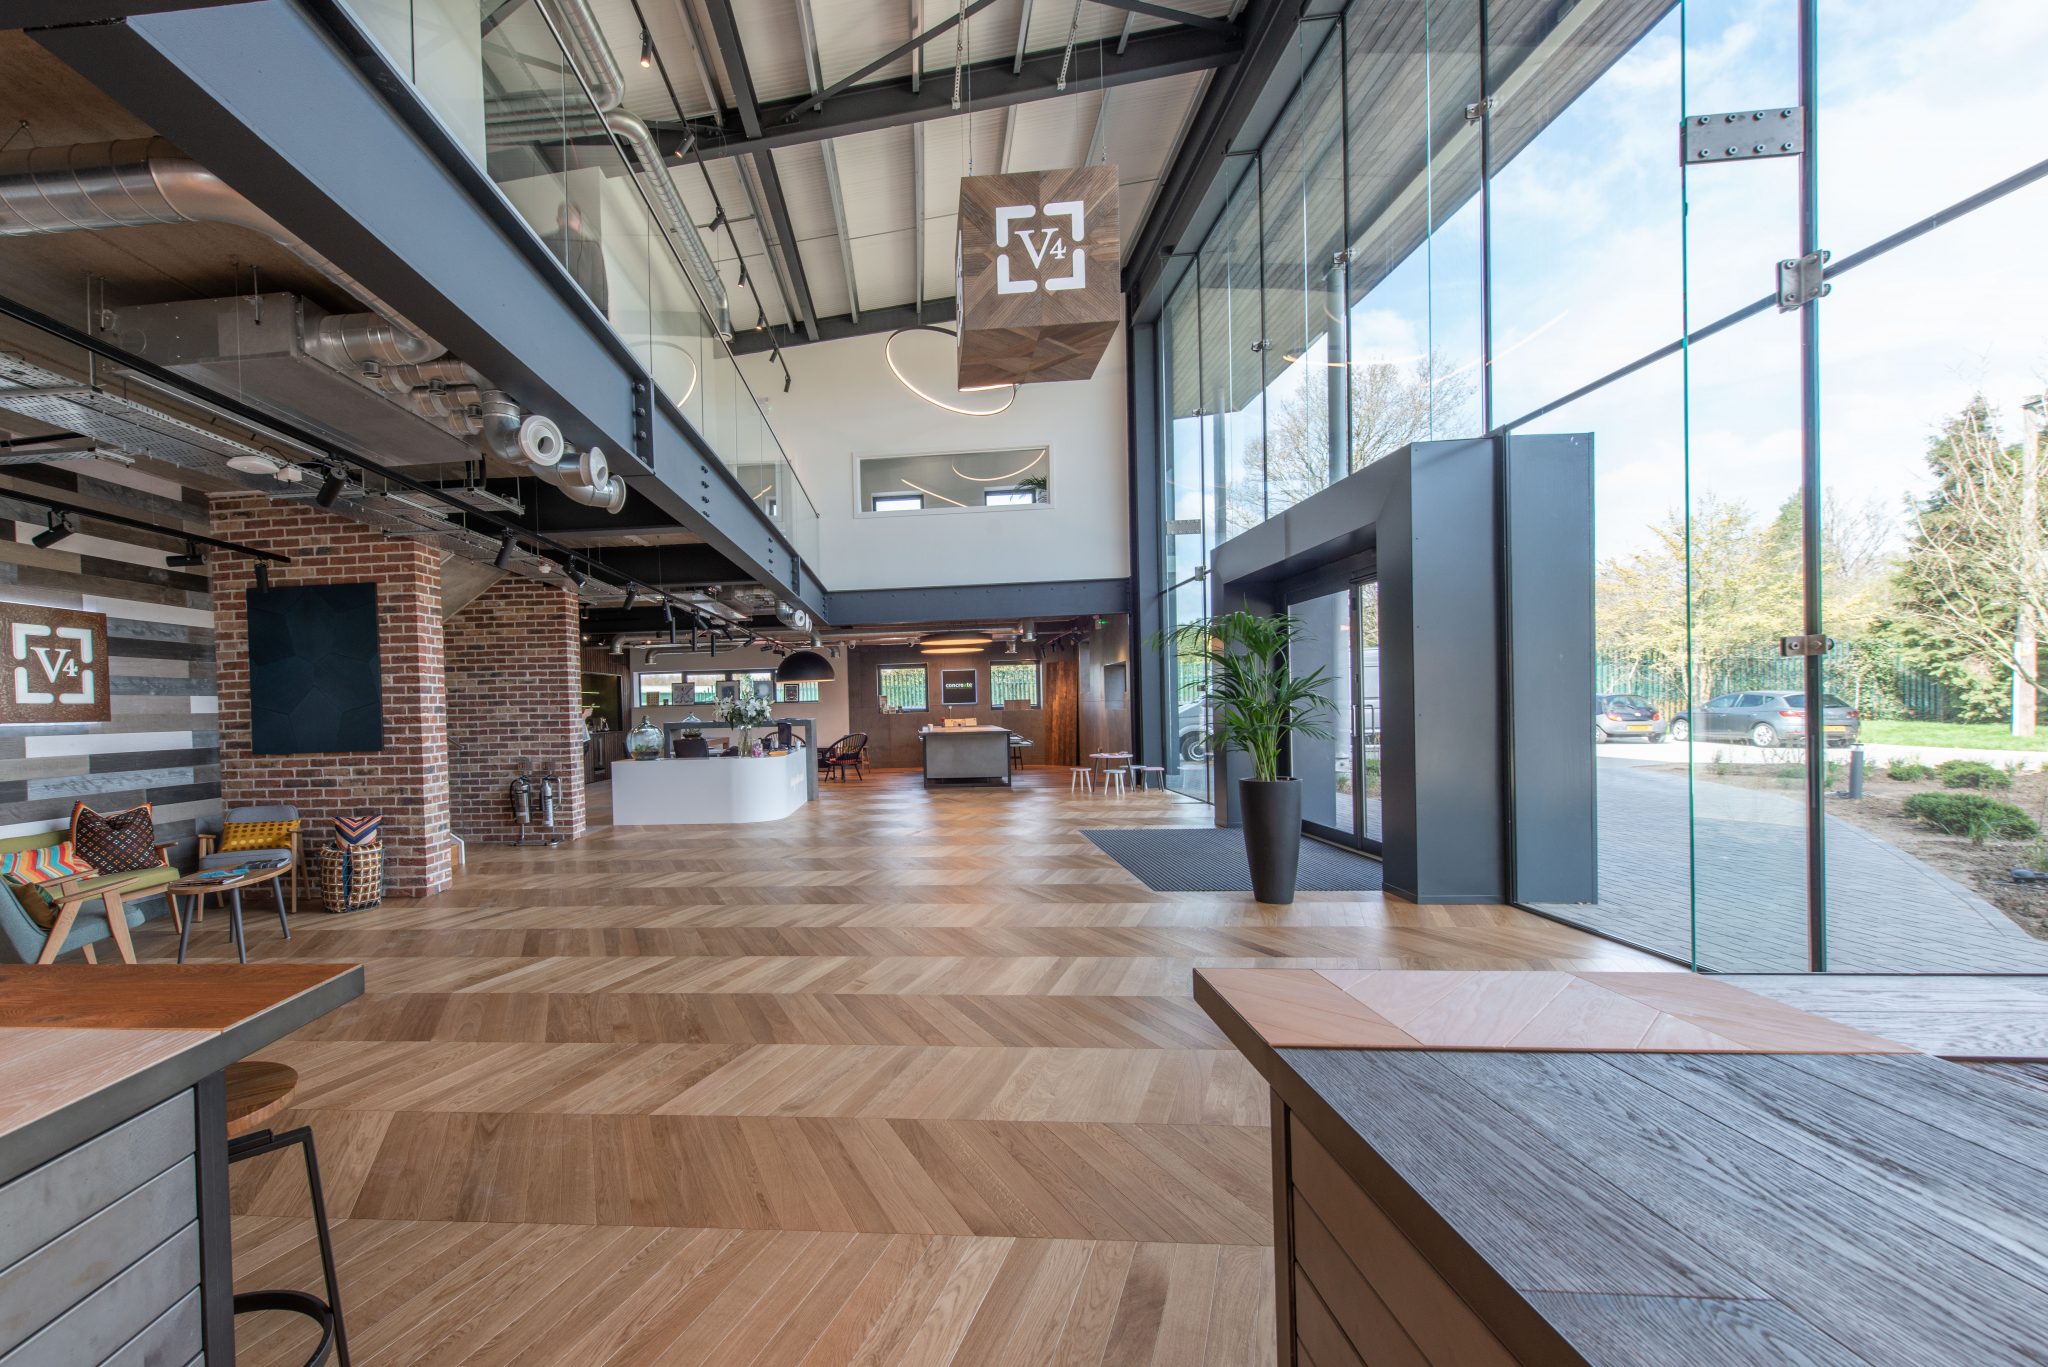 V4 Wood Flooring has opened the doors of its new £3 million design centre in Woking